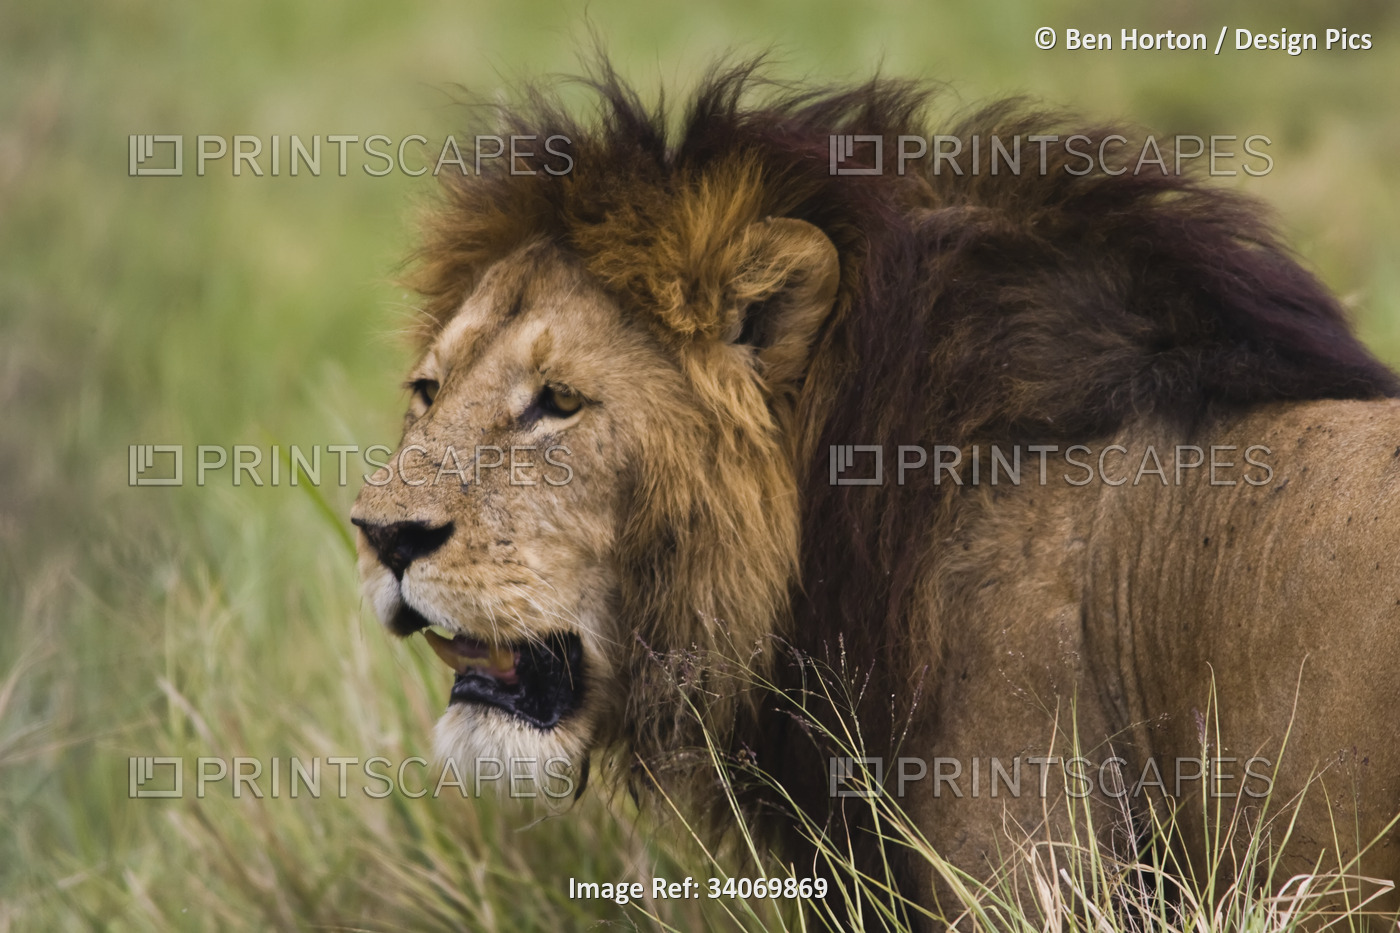 A lion roams the tall grass in the Serengeti.